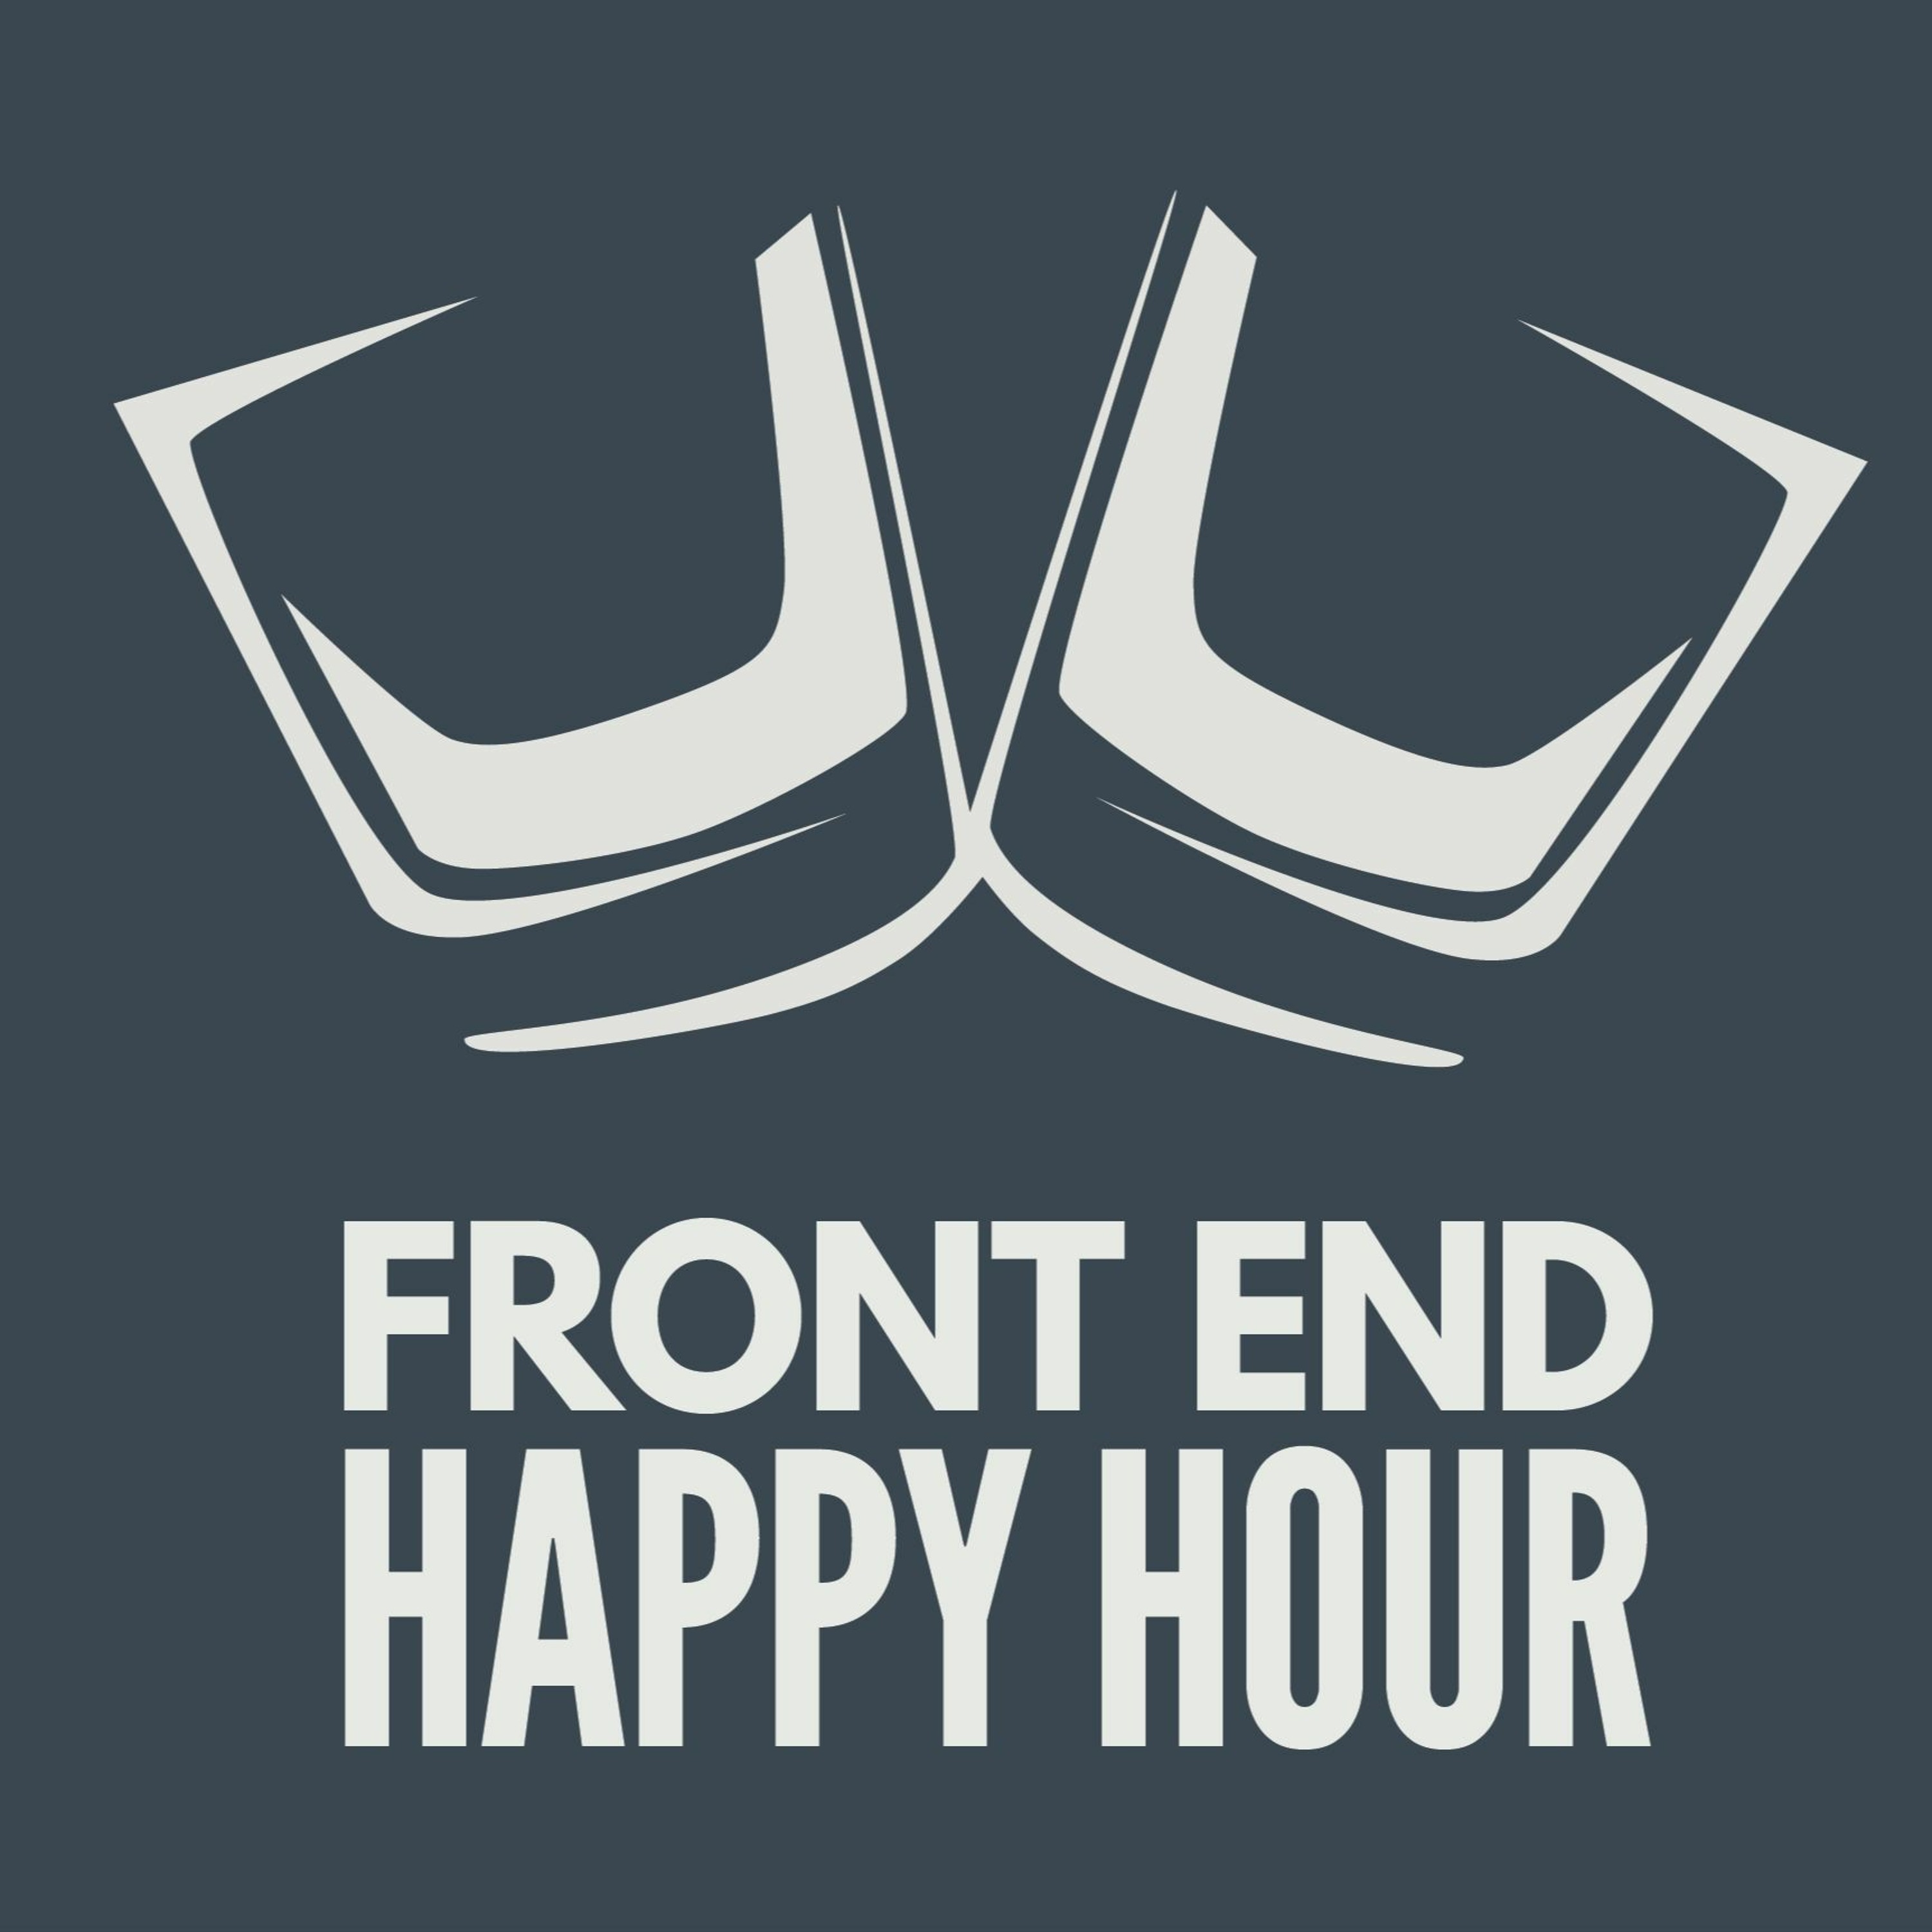 Episode 025 - From bar-back to frontender